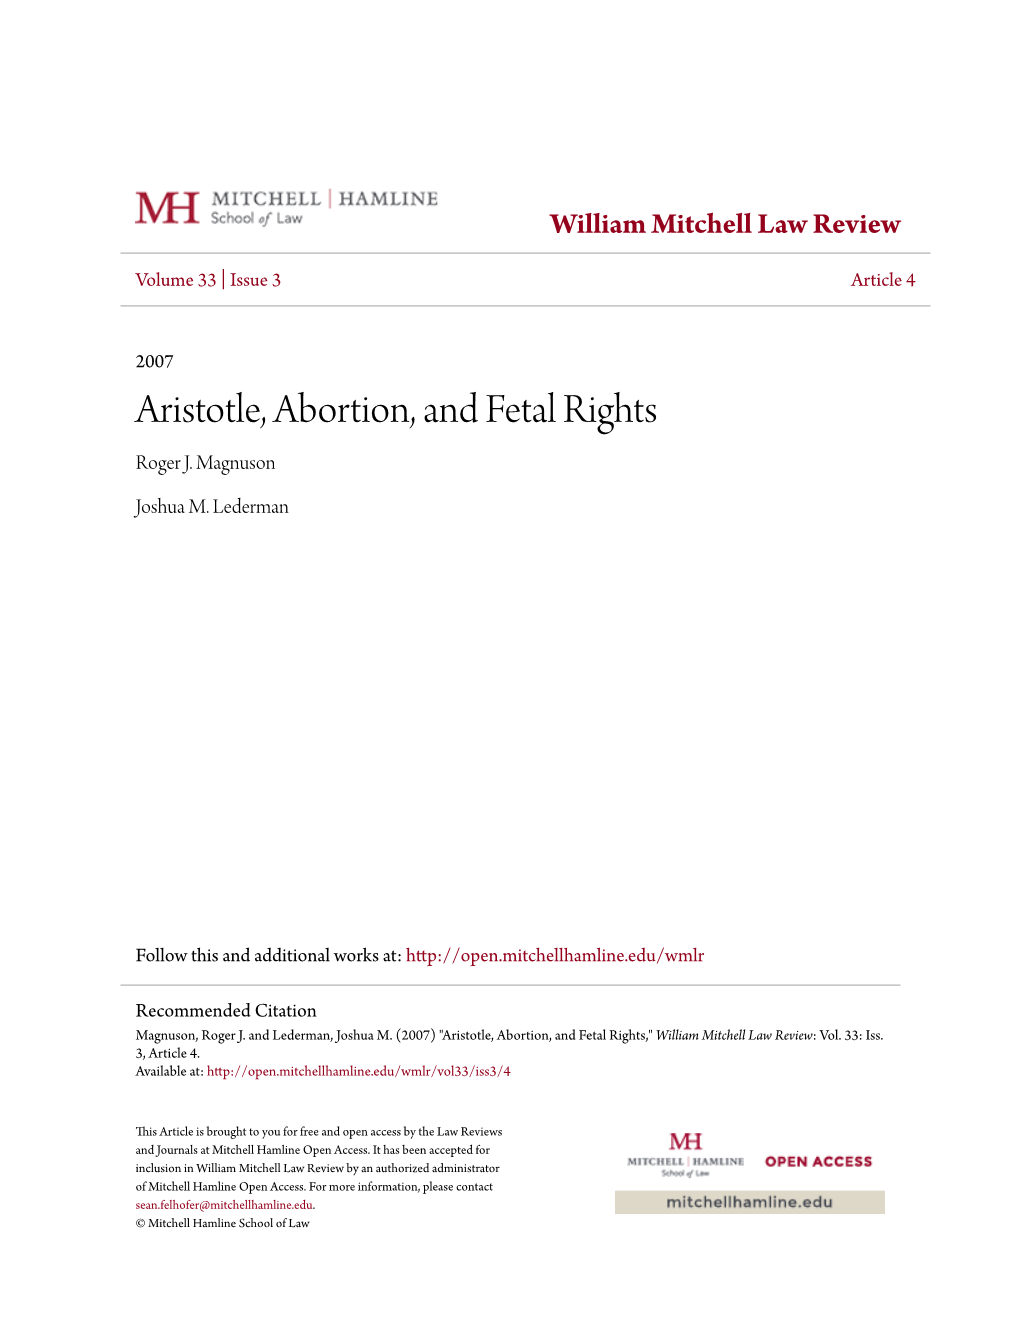 Aristotle, Abortion, and Fetal Rights Roger J